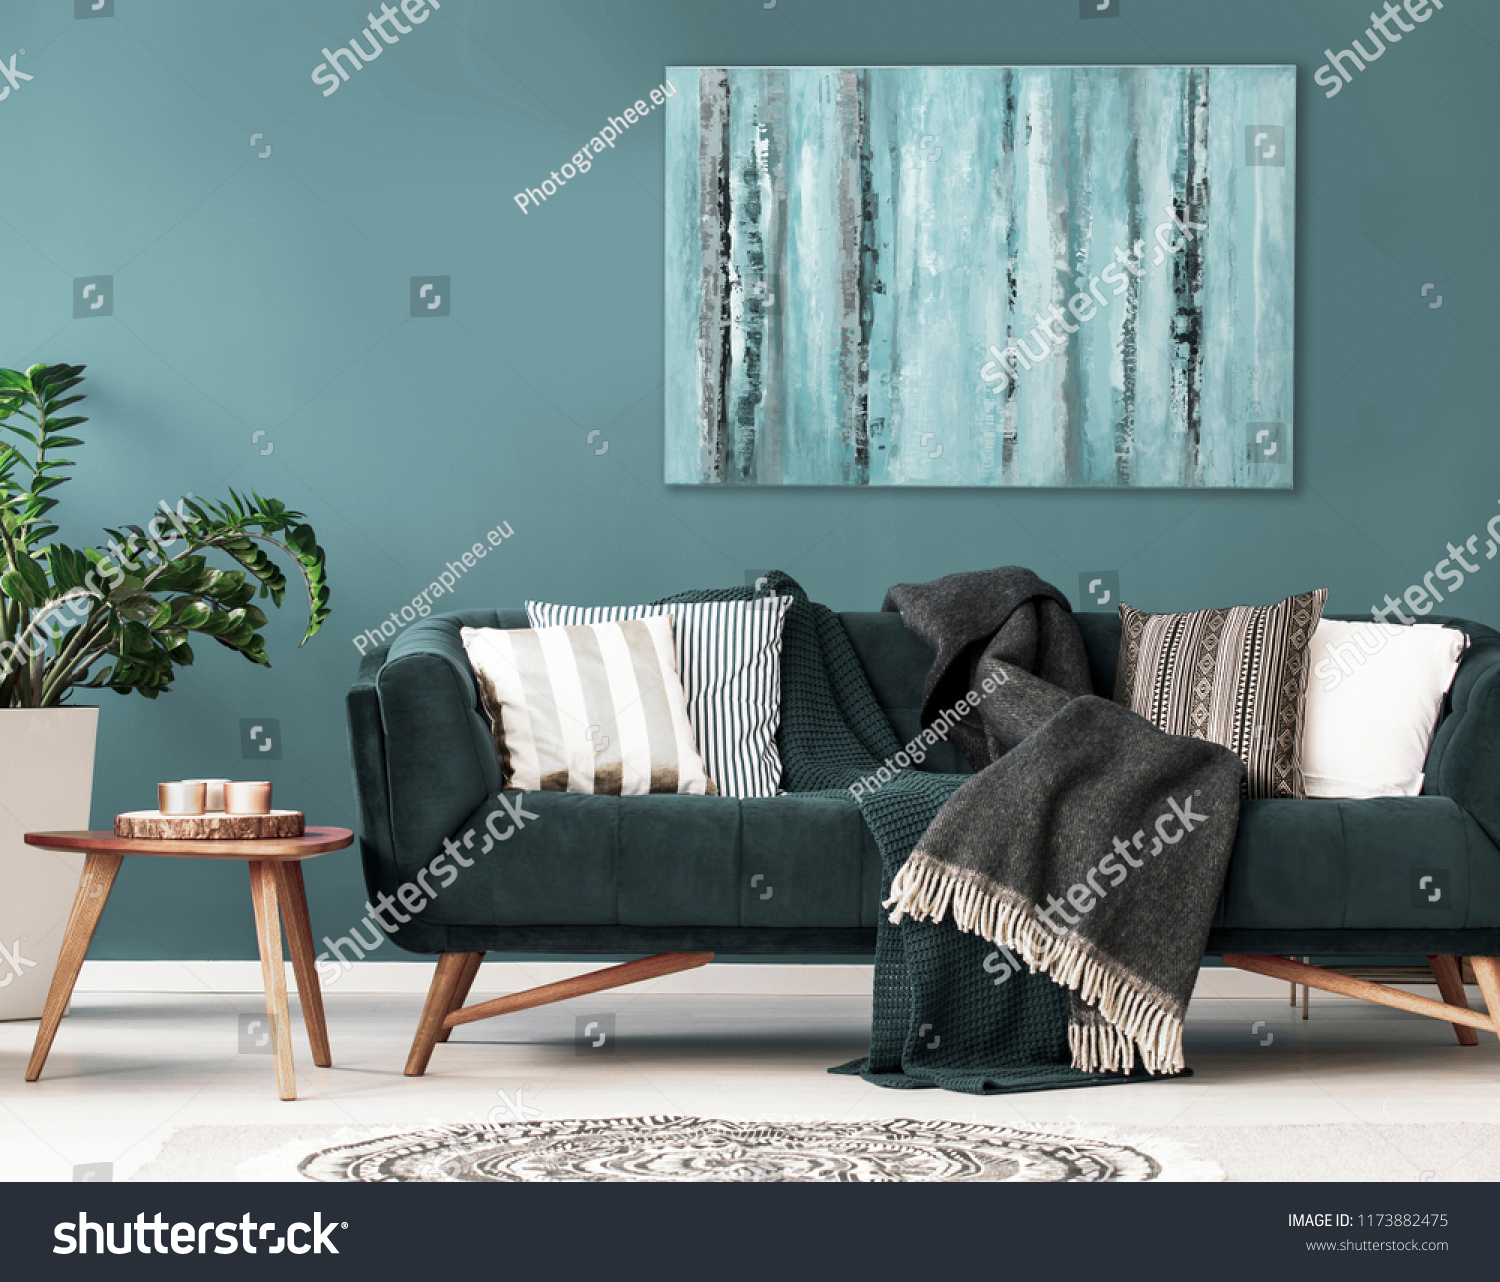 Patterned cushions on sofa next to wooden table and plant in dark apartment interior. Real photo #1173882475